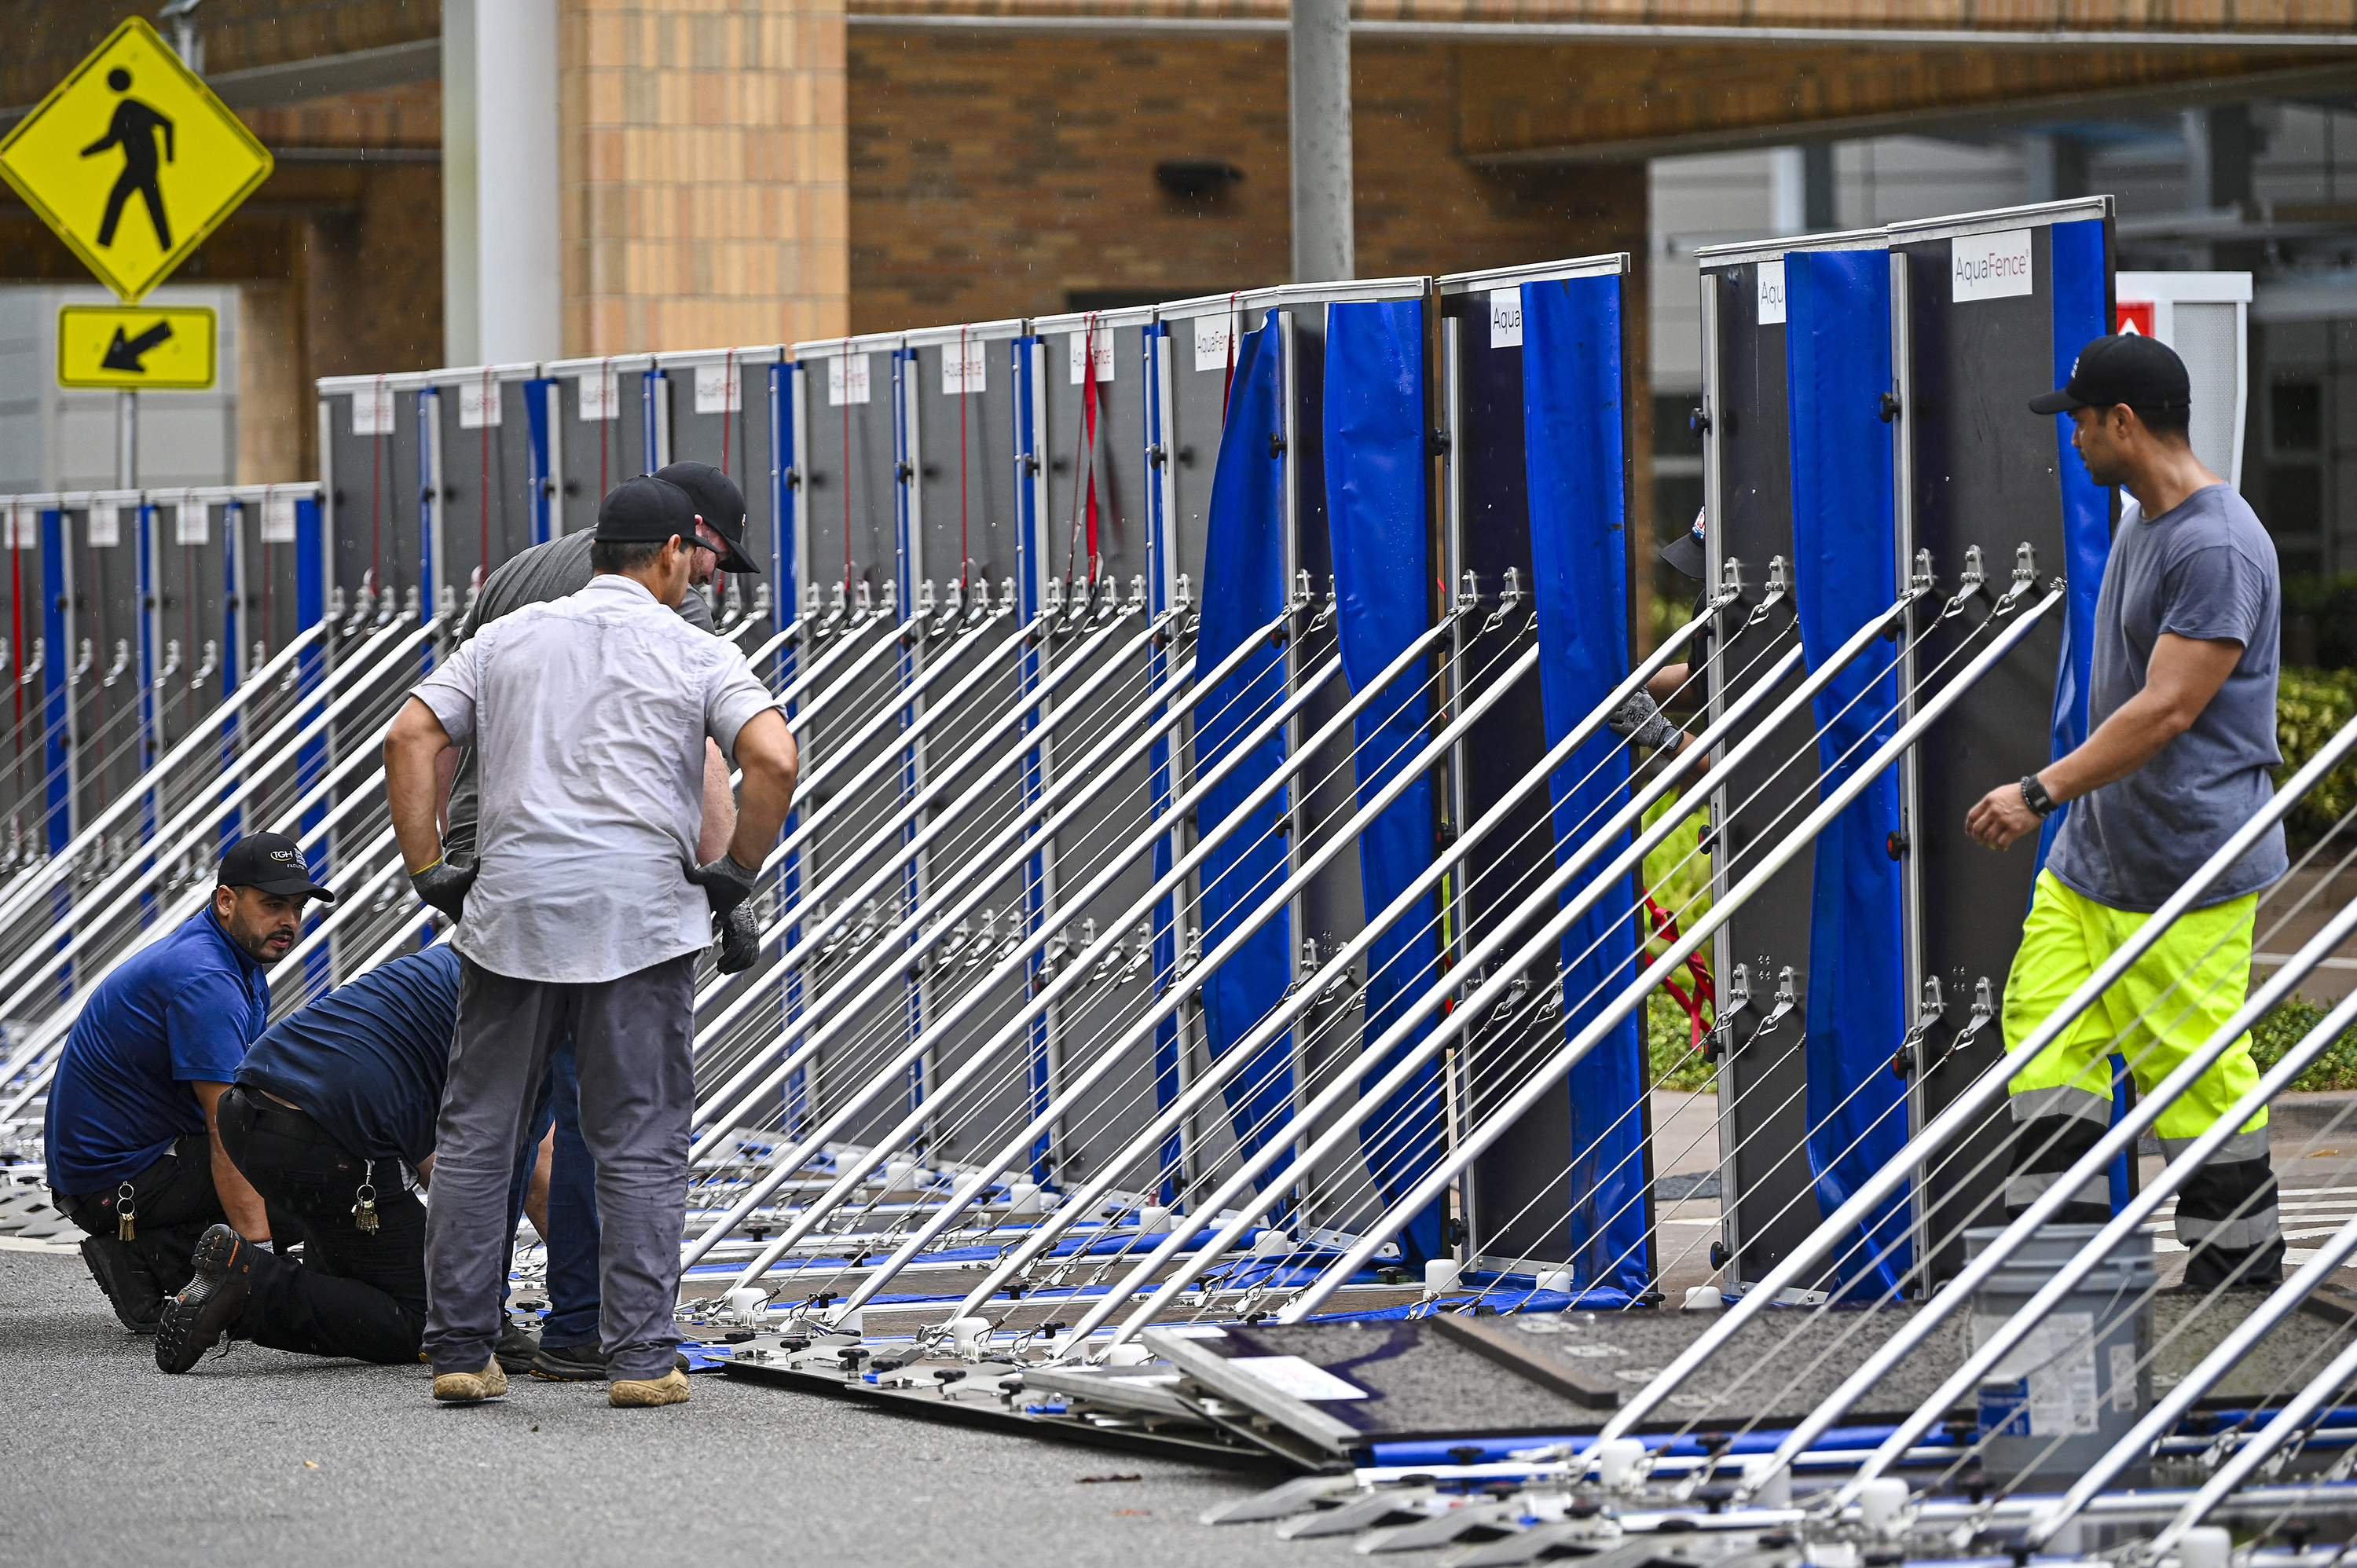 Workers set up a fence to prevent flooding at Tampa General Hospital in Tampa, Florida, on August 29, as the city prepares for Hurricane Idalia.